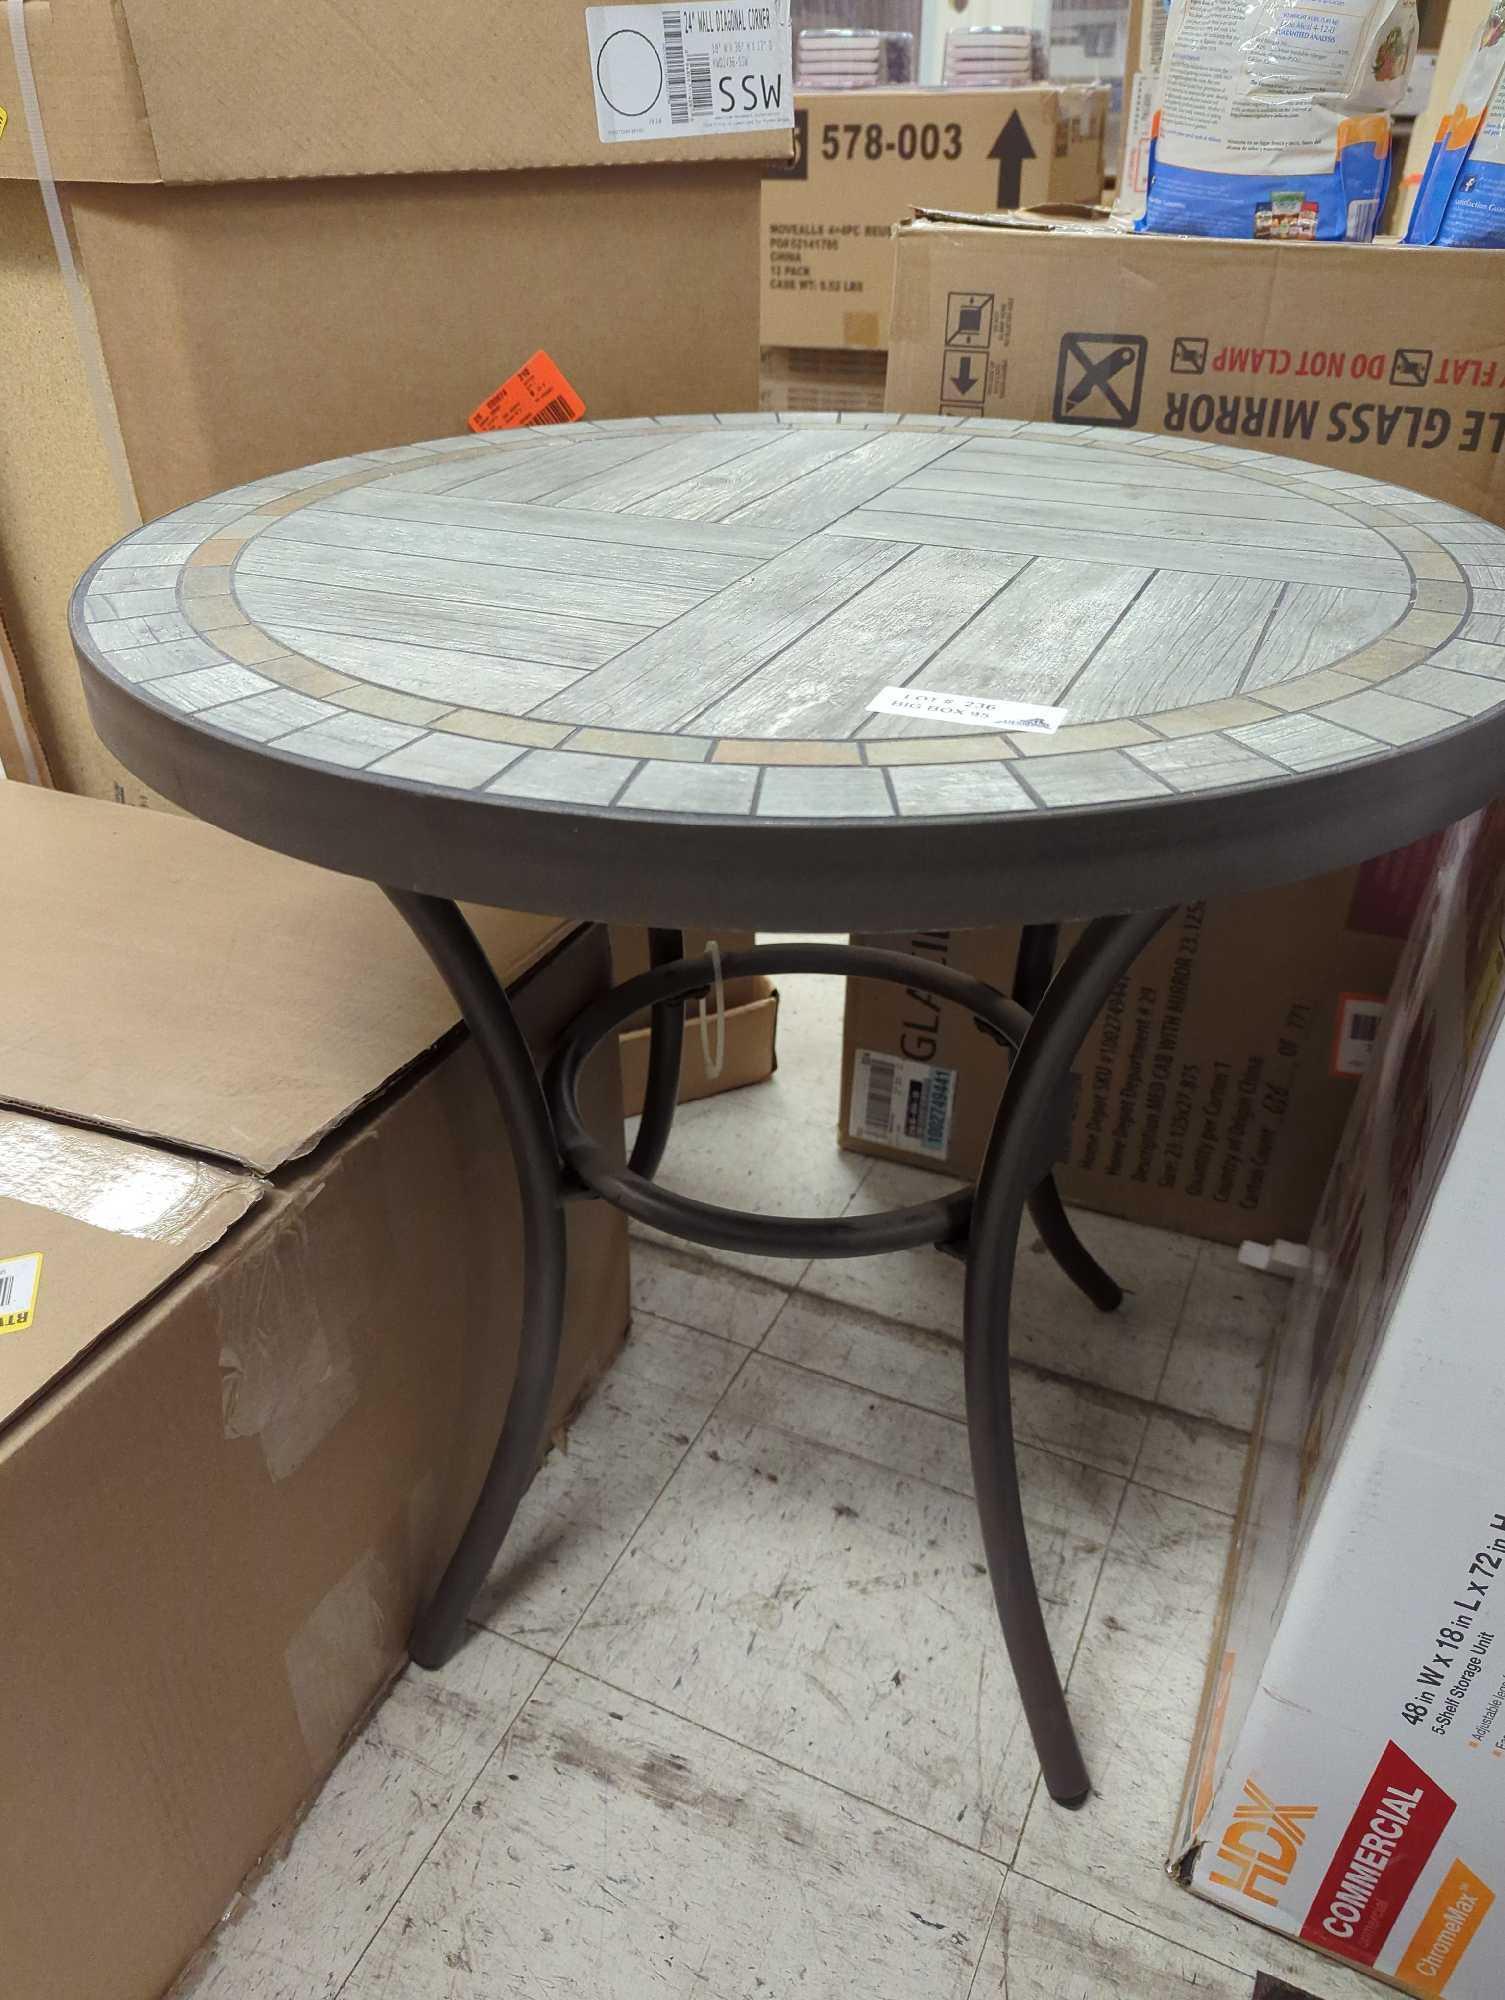 Stone Round Bistro Table Measurements Approximately 27 in x 26.5 in, Appears to be New Out of the